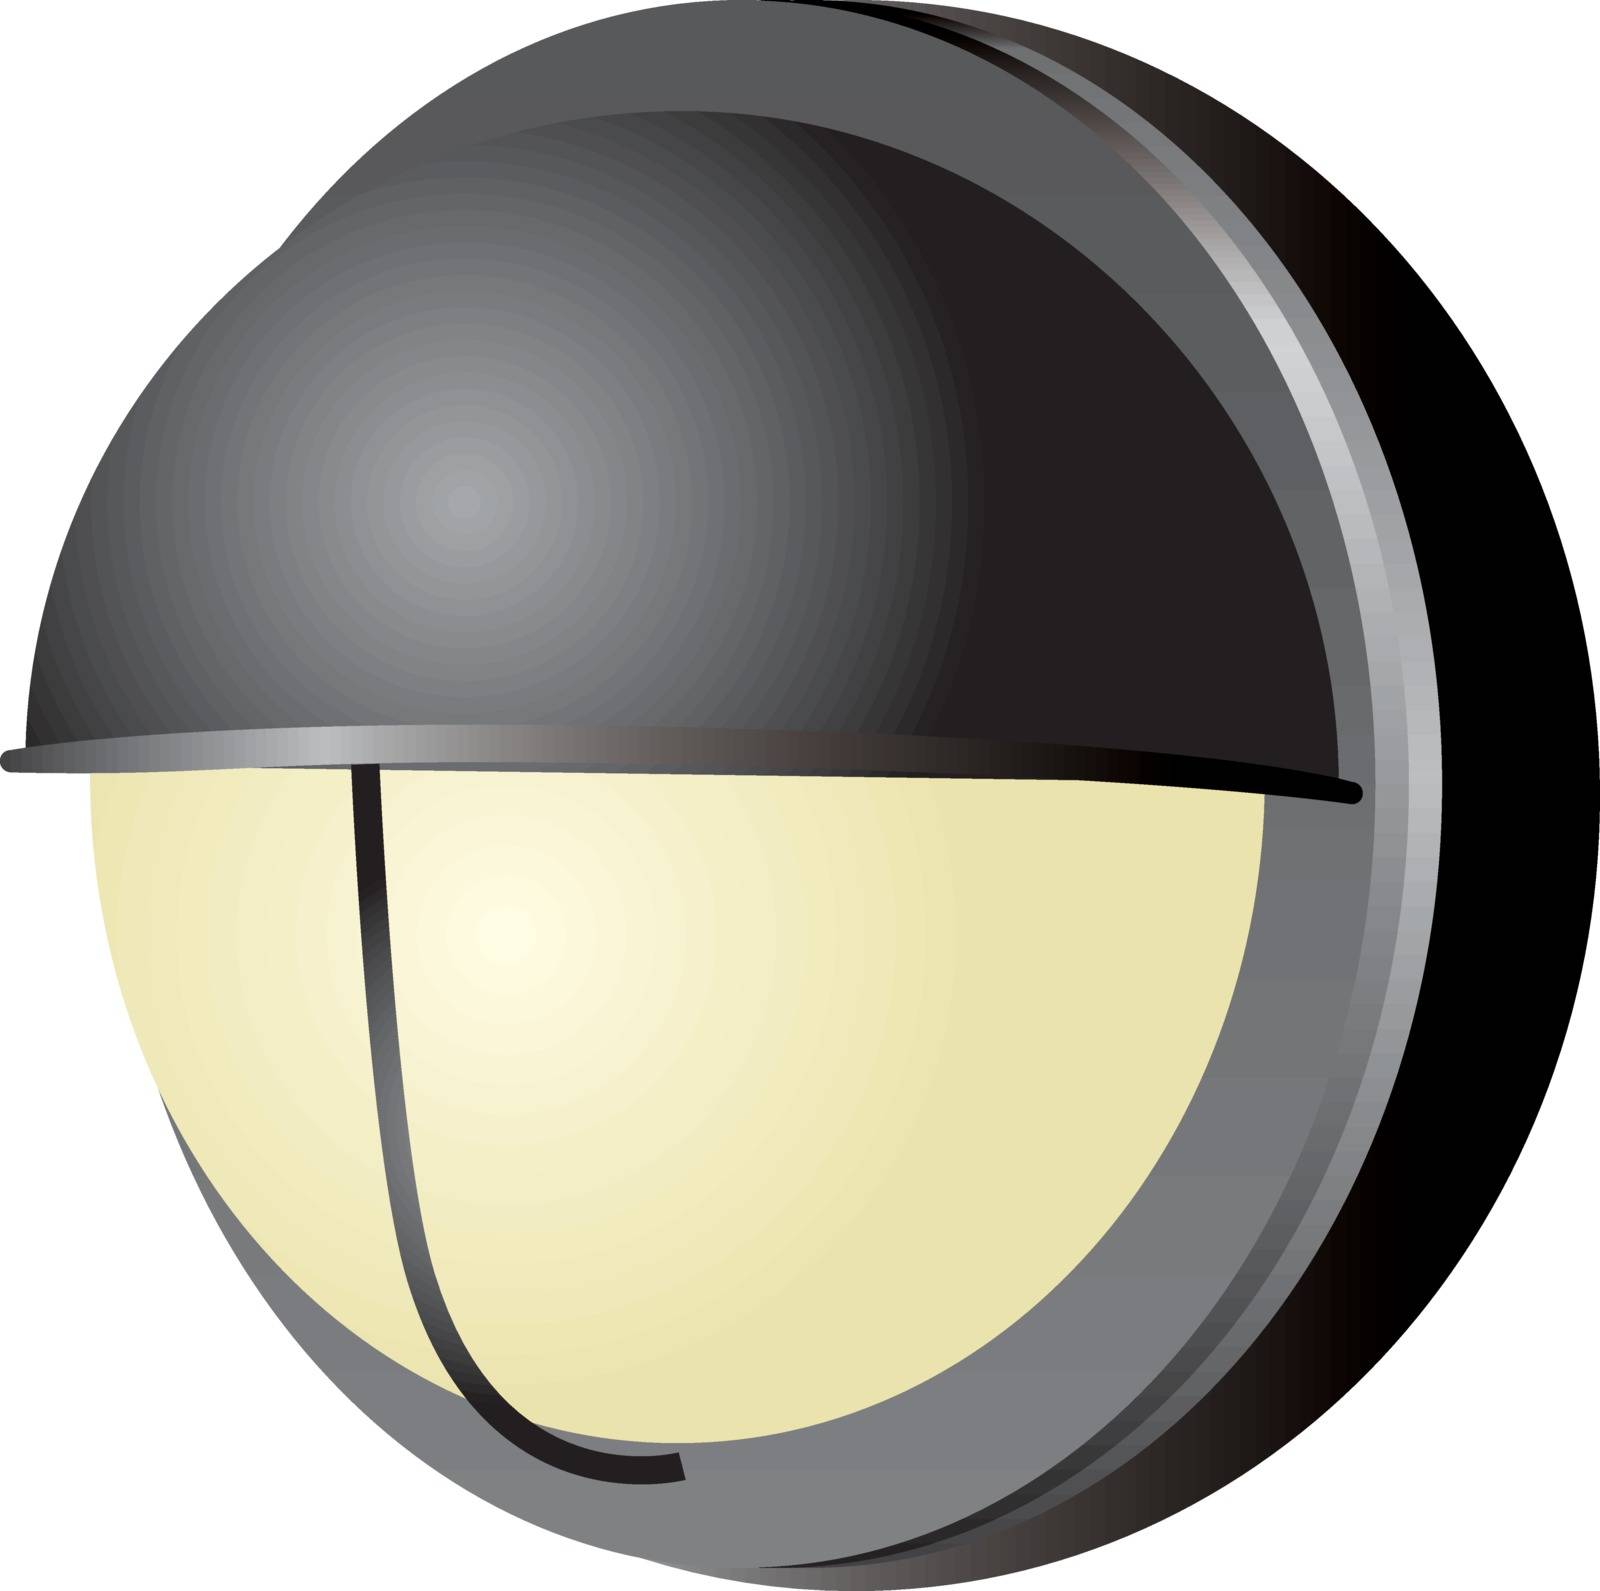 Industrial lamp with a protective cap. Vector illustration.